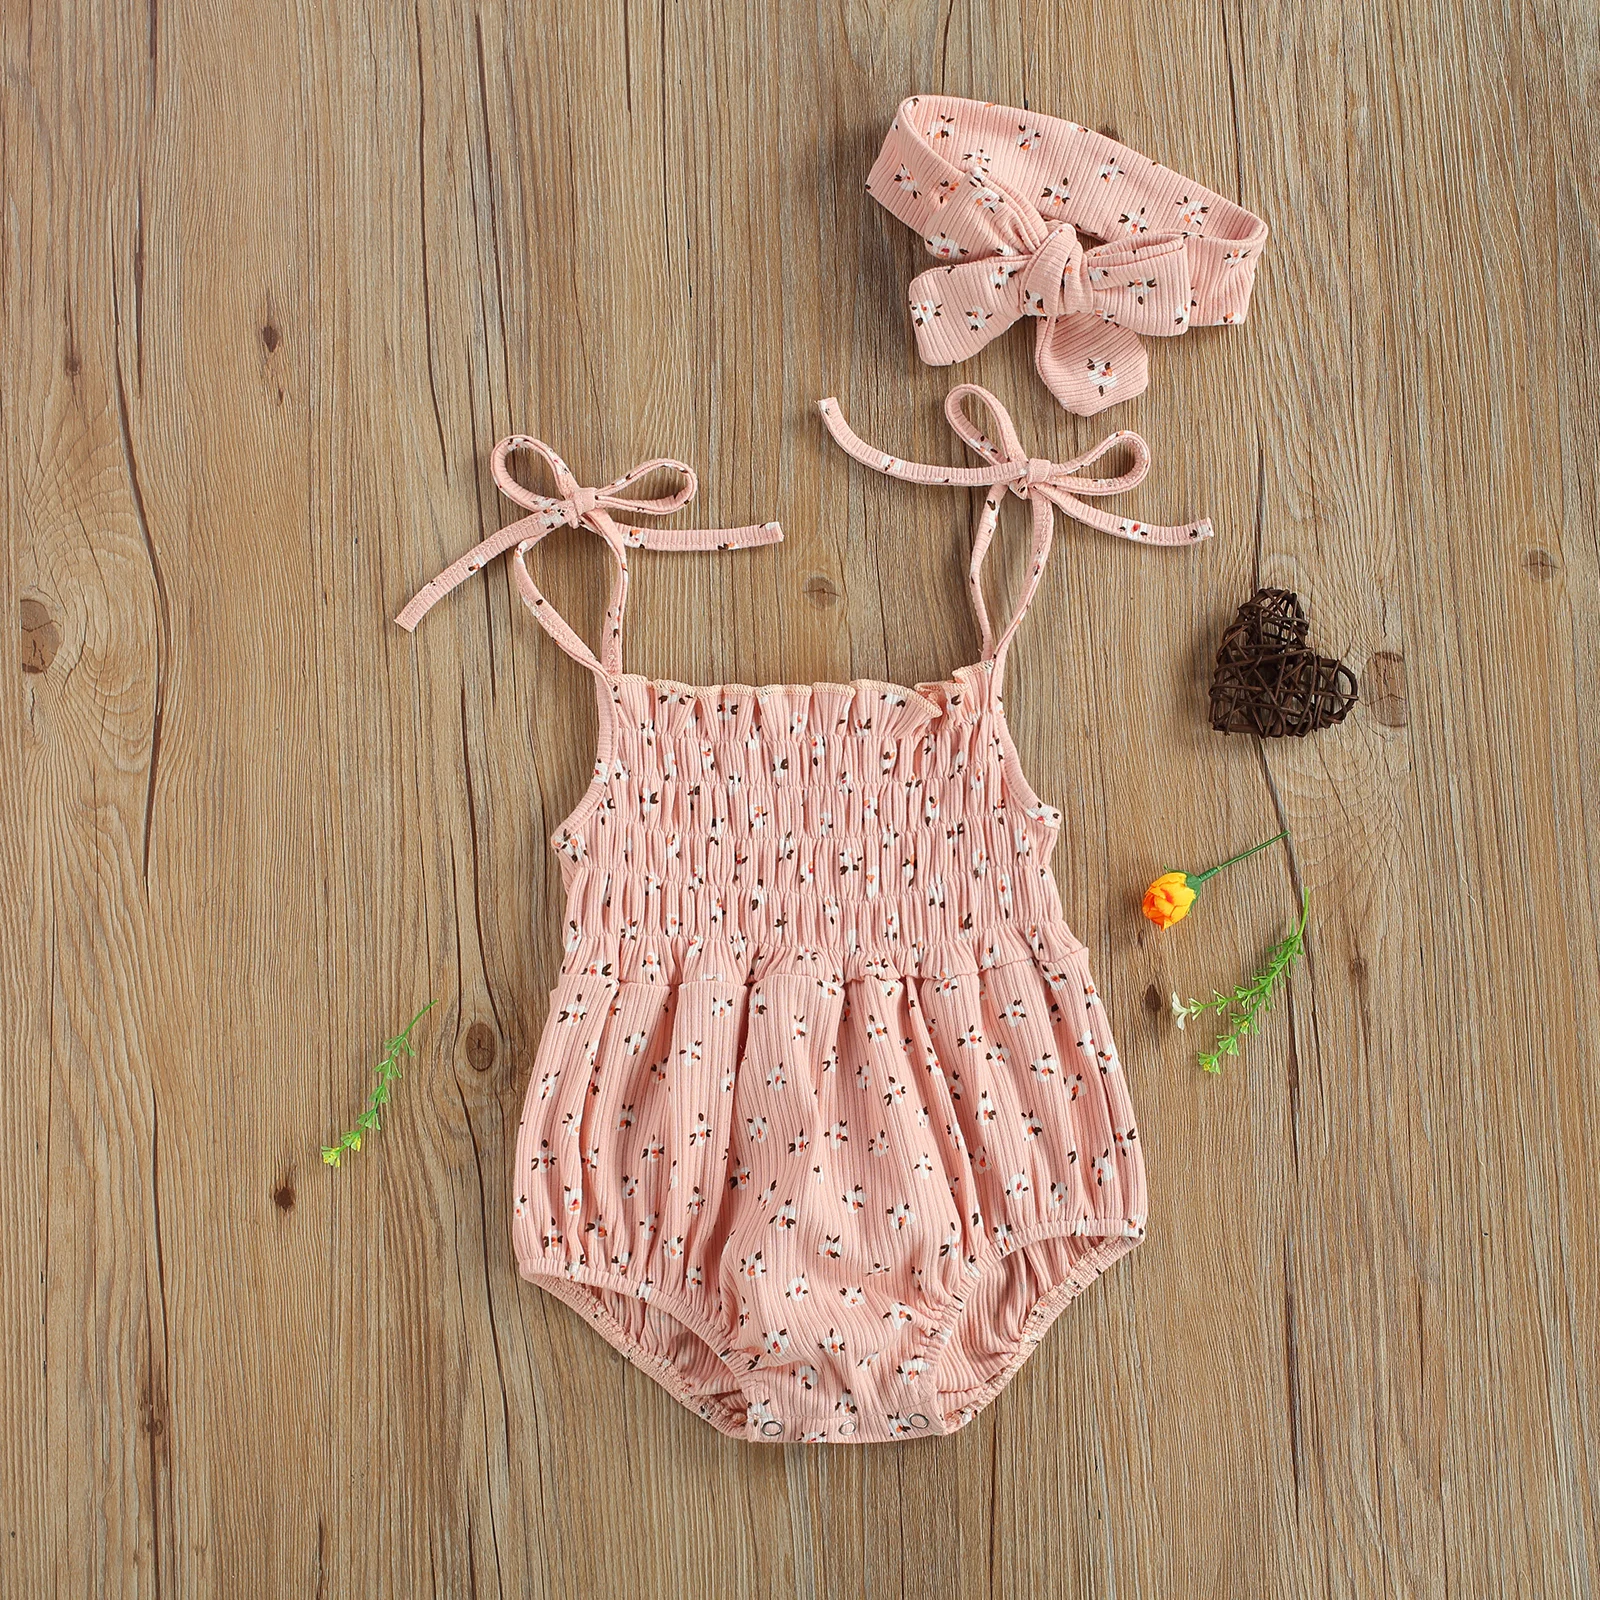 Sommer Neue Prinzessin Infant Baby Mädchen Romper Outfits Ärmelloses Floral Print Lace Up Overall + Bowknot Stirnband Baumwolle Beachwear